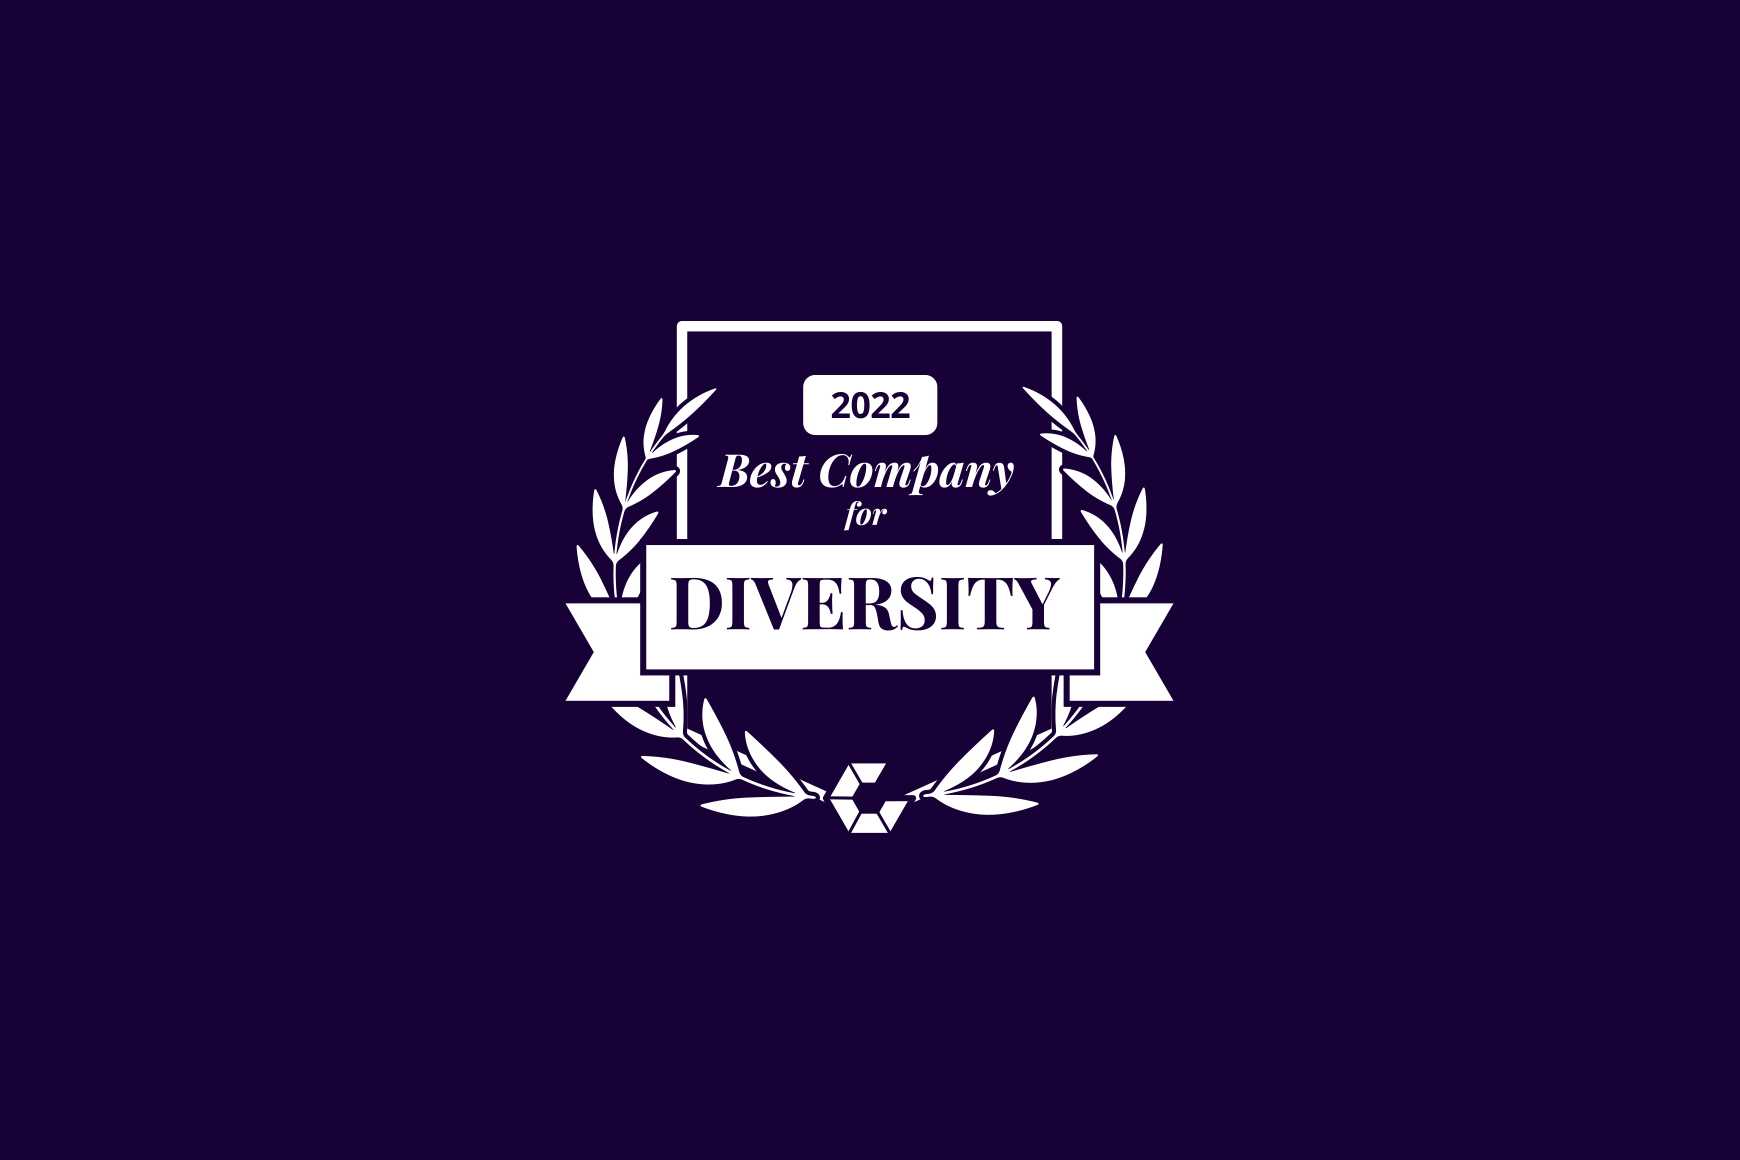 Comparably Names Talkdesk a Best Company for Diversity